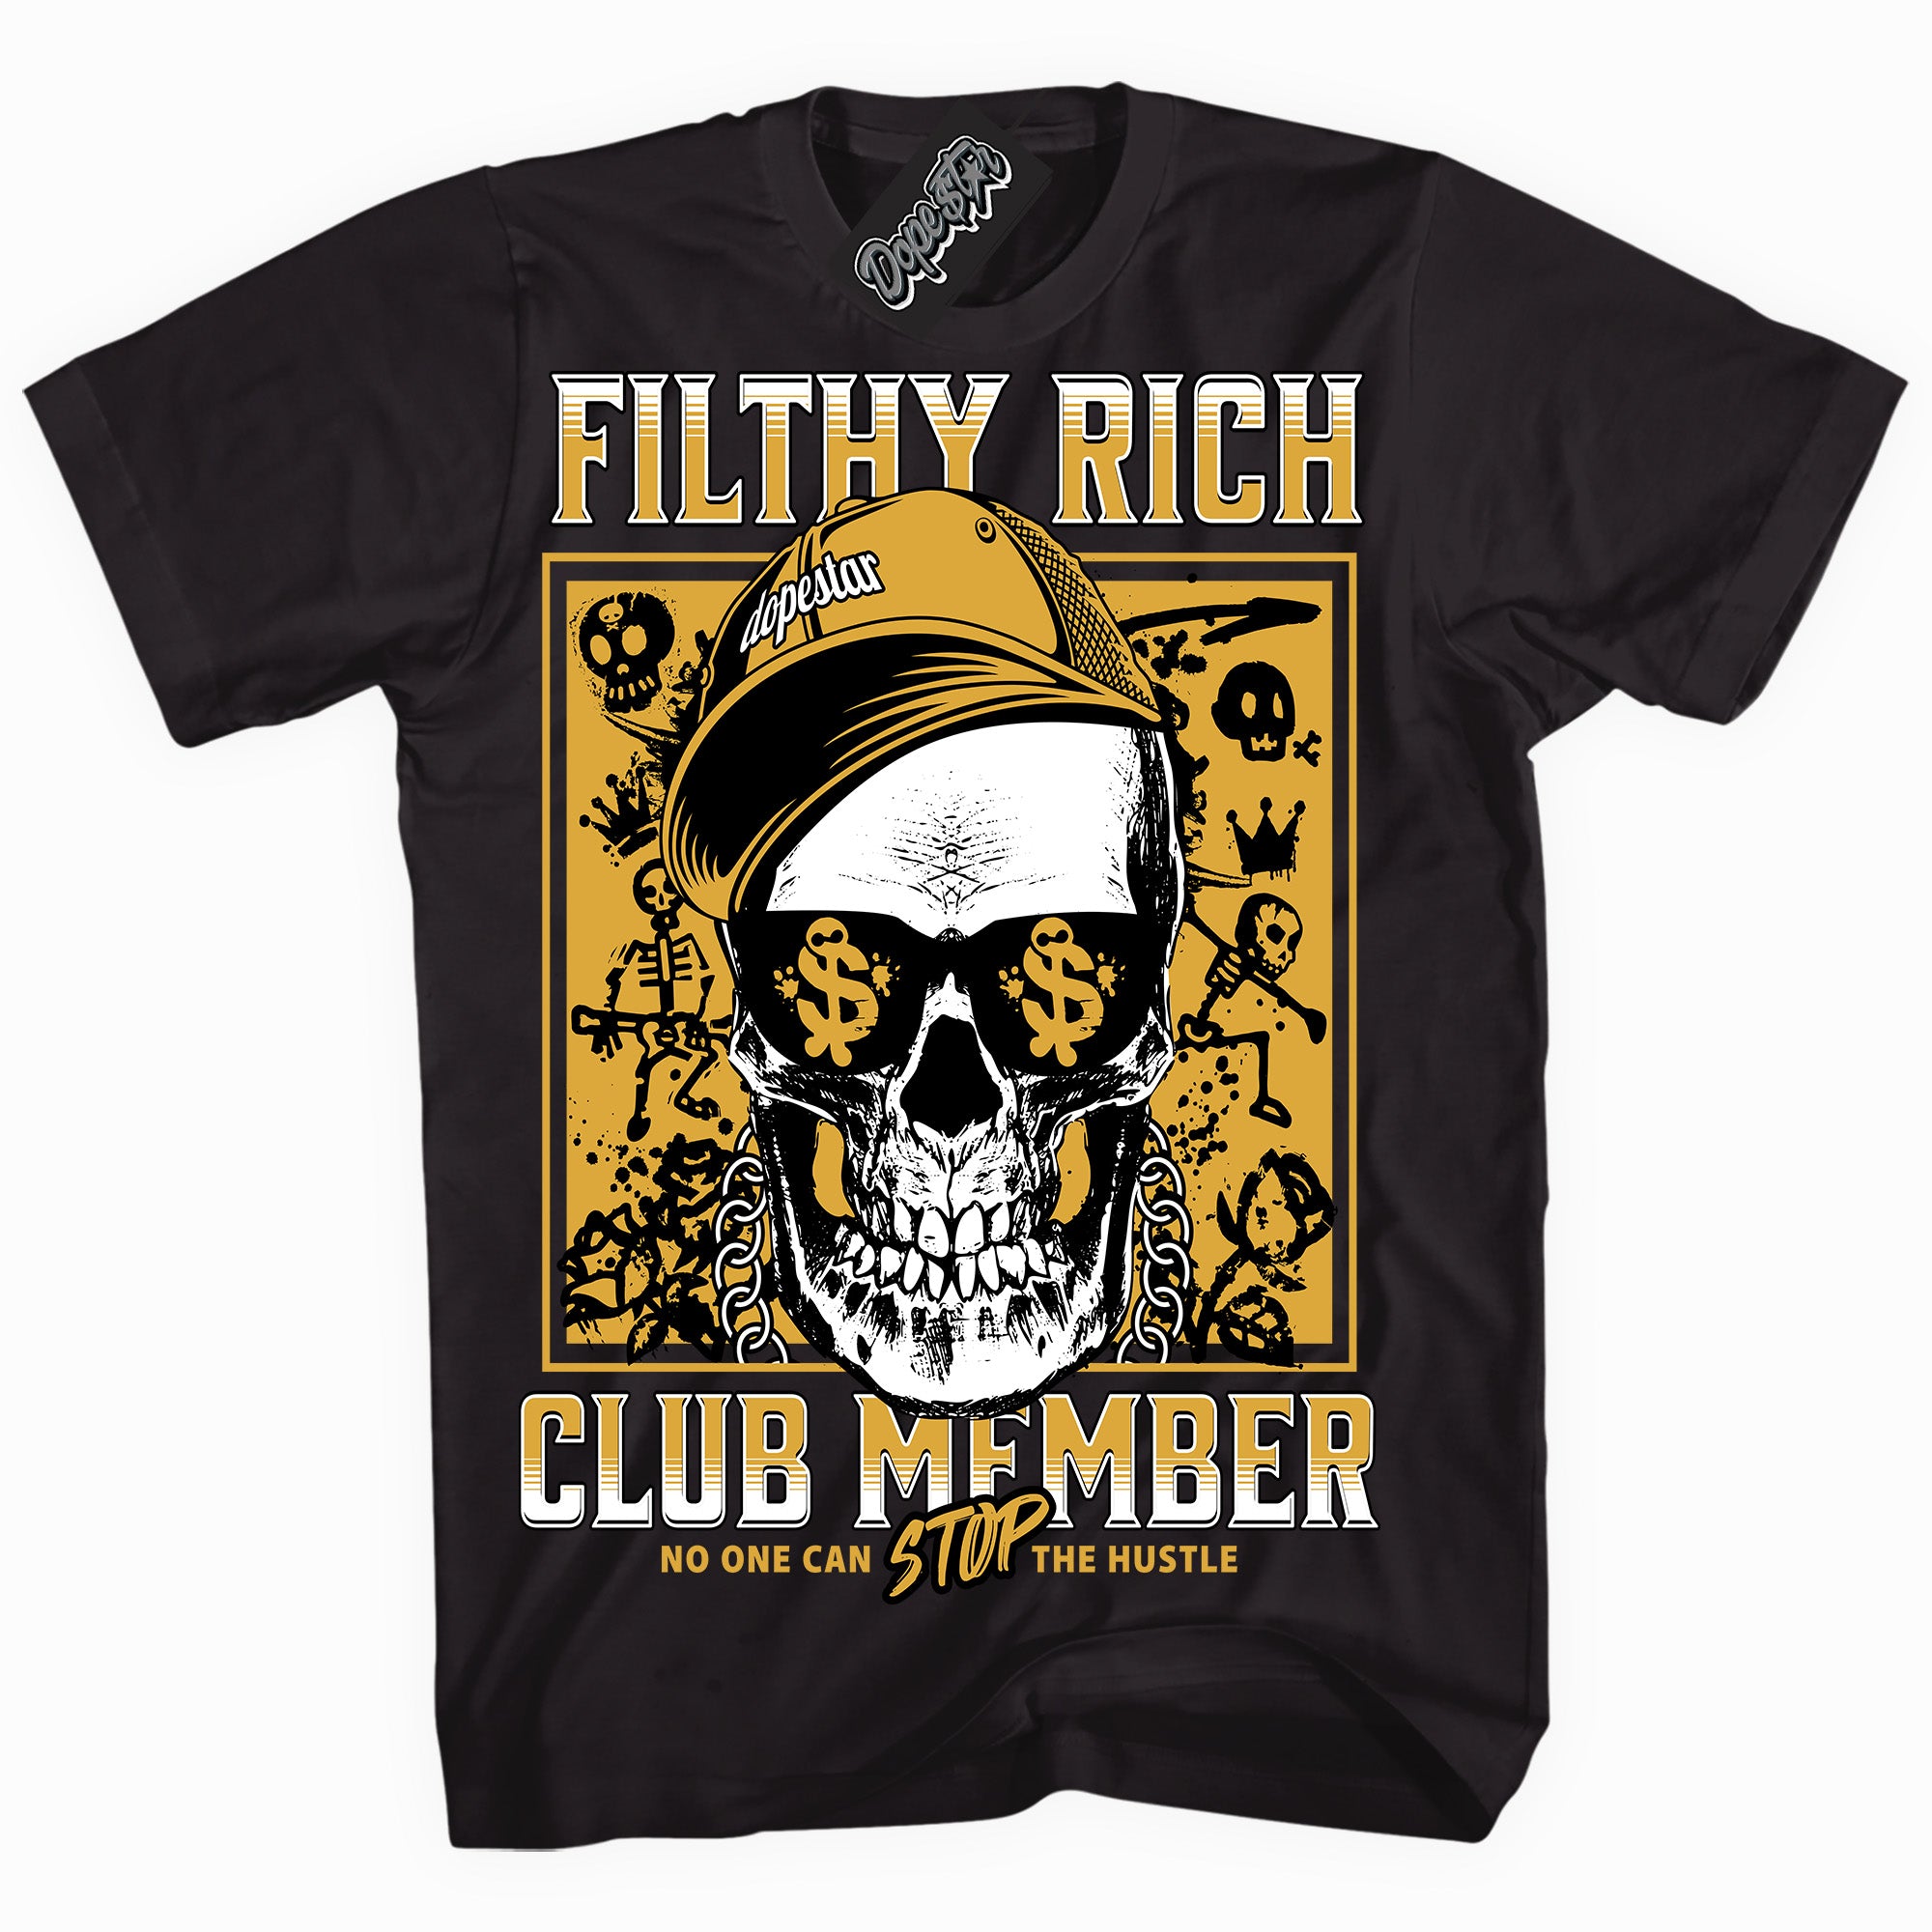 Cool Black Shirt With Filthy Rich design That Perfectly Matches YELLOW OCHRE 6s Sneakers.